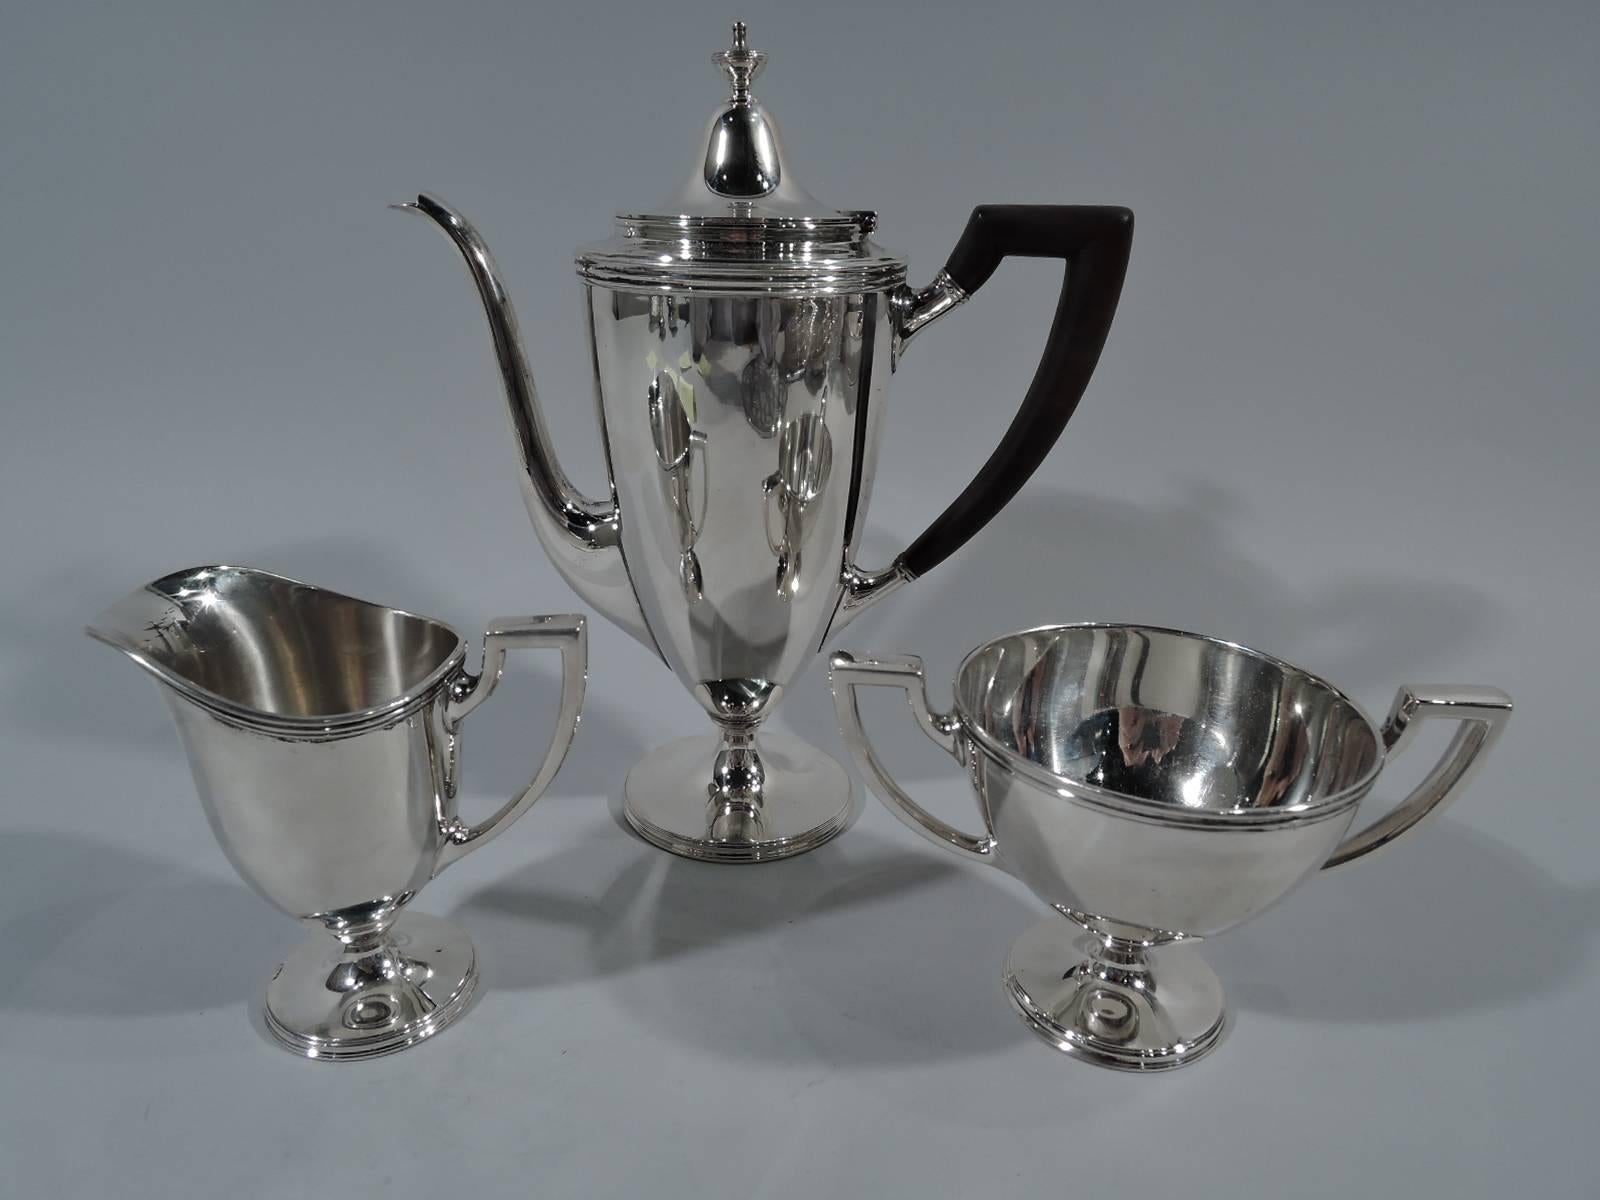 Traditional sterling silver coffee service. Made by Tiffany & Co. in New York, circa 1928. This service comprises coffeepot, creamer and sugar.

Each: Georgian form with stepped foot, reeded rim, and scroll-bracket handle. Coffeepot has hinged